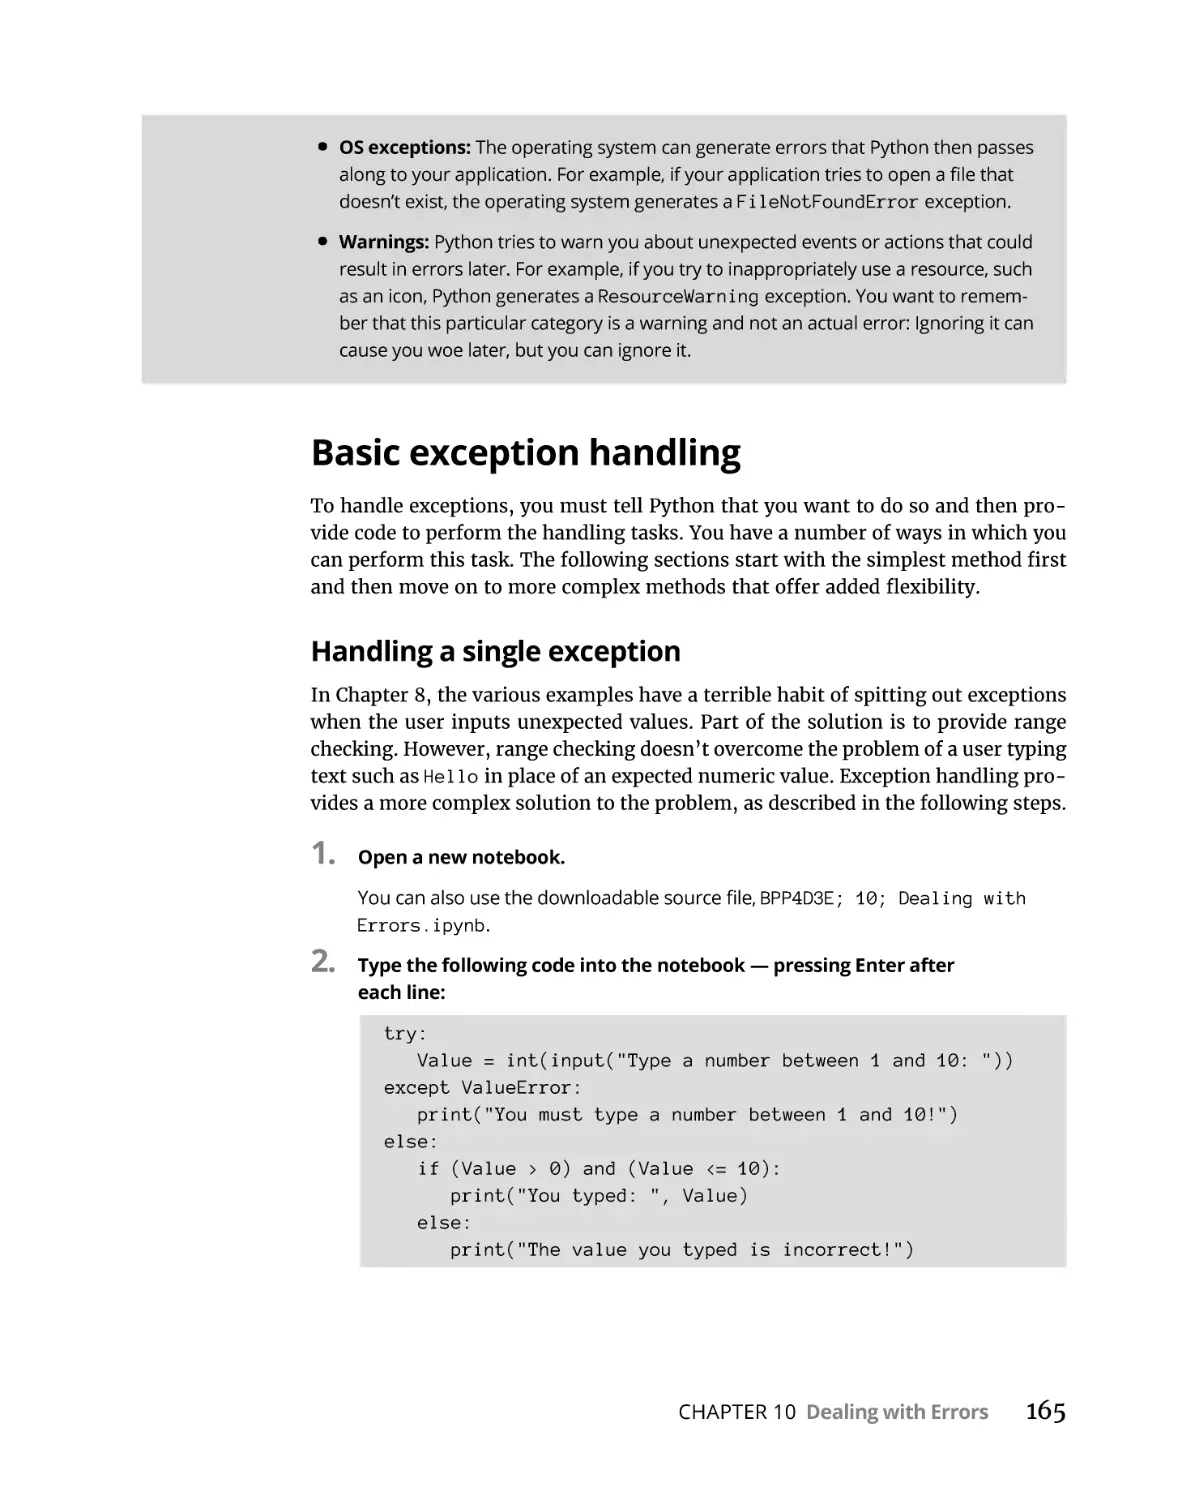 Basic exception handling
Handling a single exception